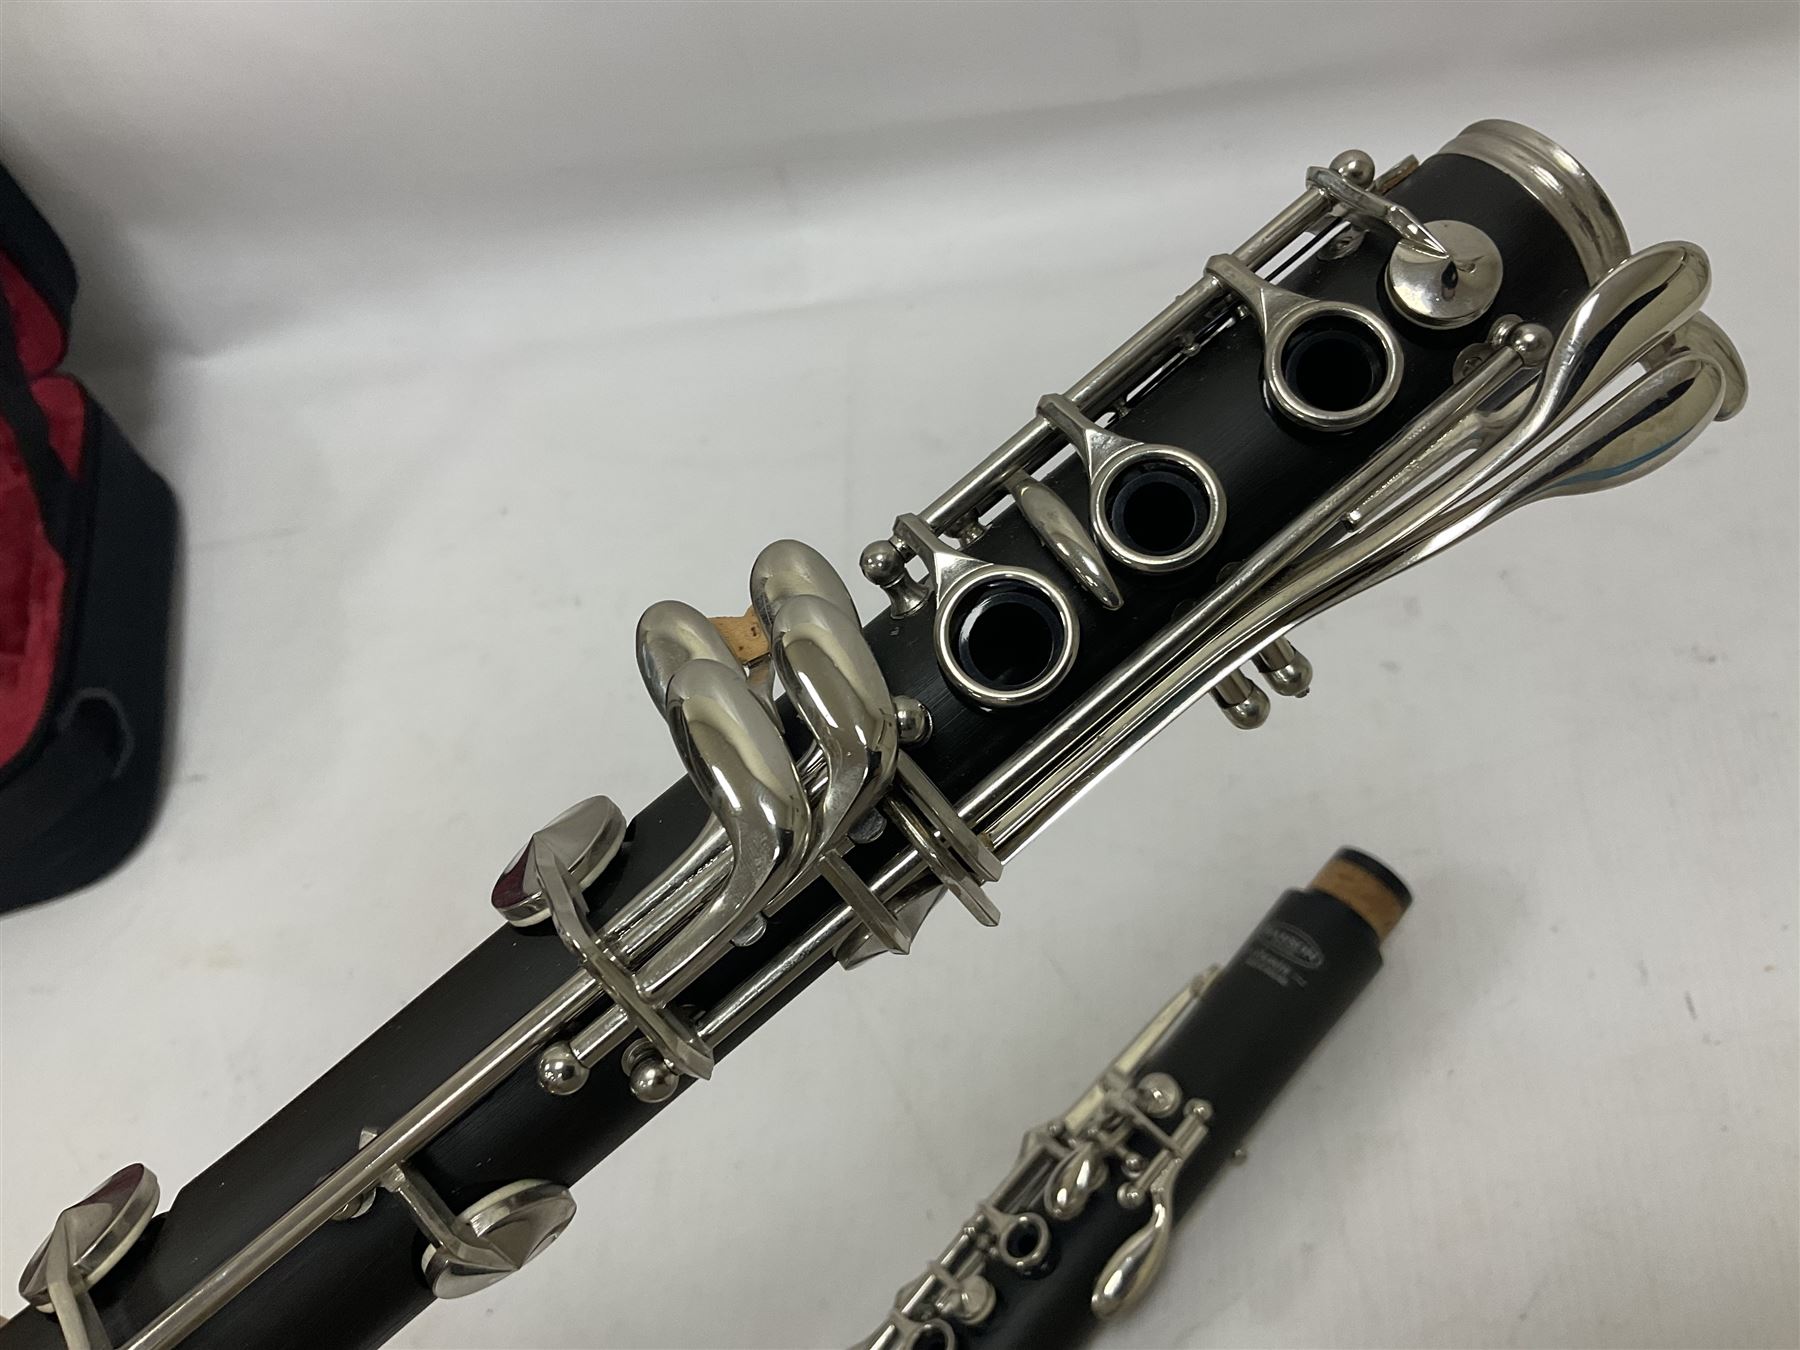 Hanson B Flat clarinet in a fitted case with accessories and three boxes of Vandoren reeds - Image 18 of 21